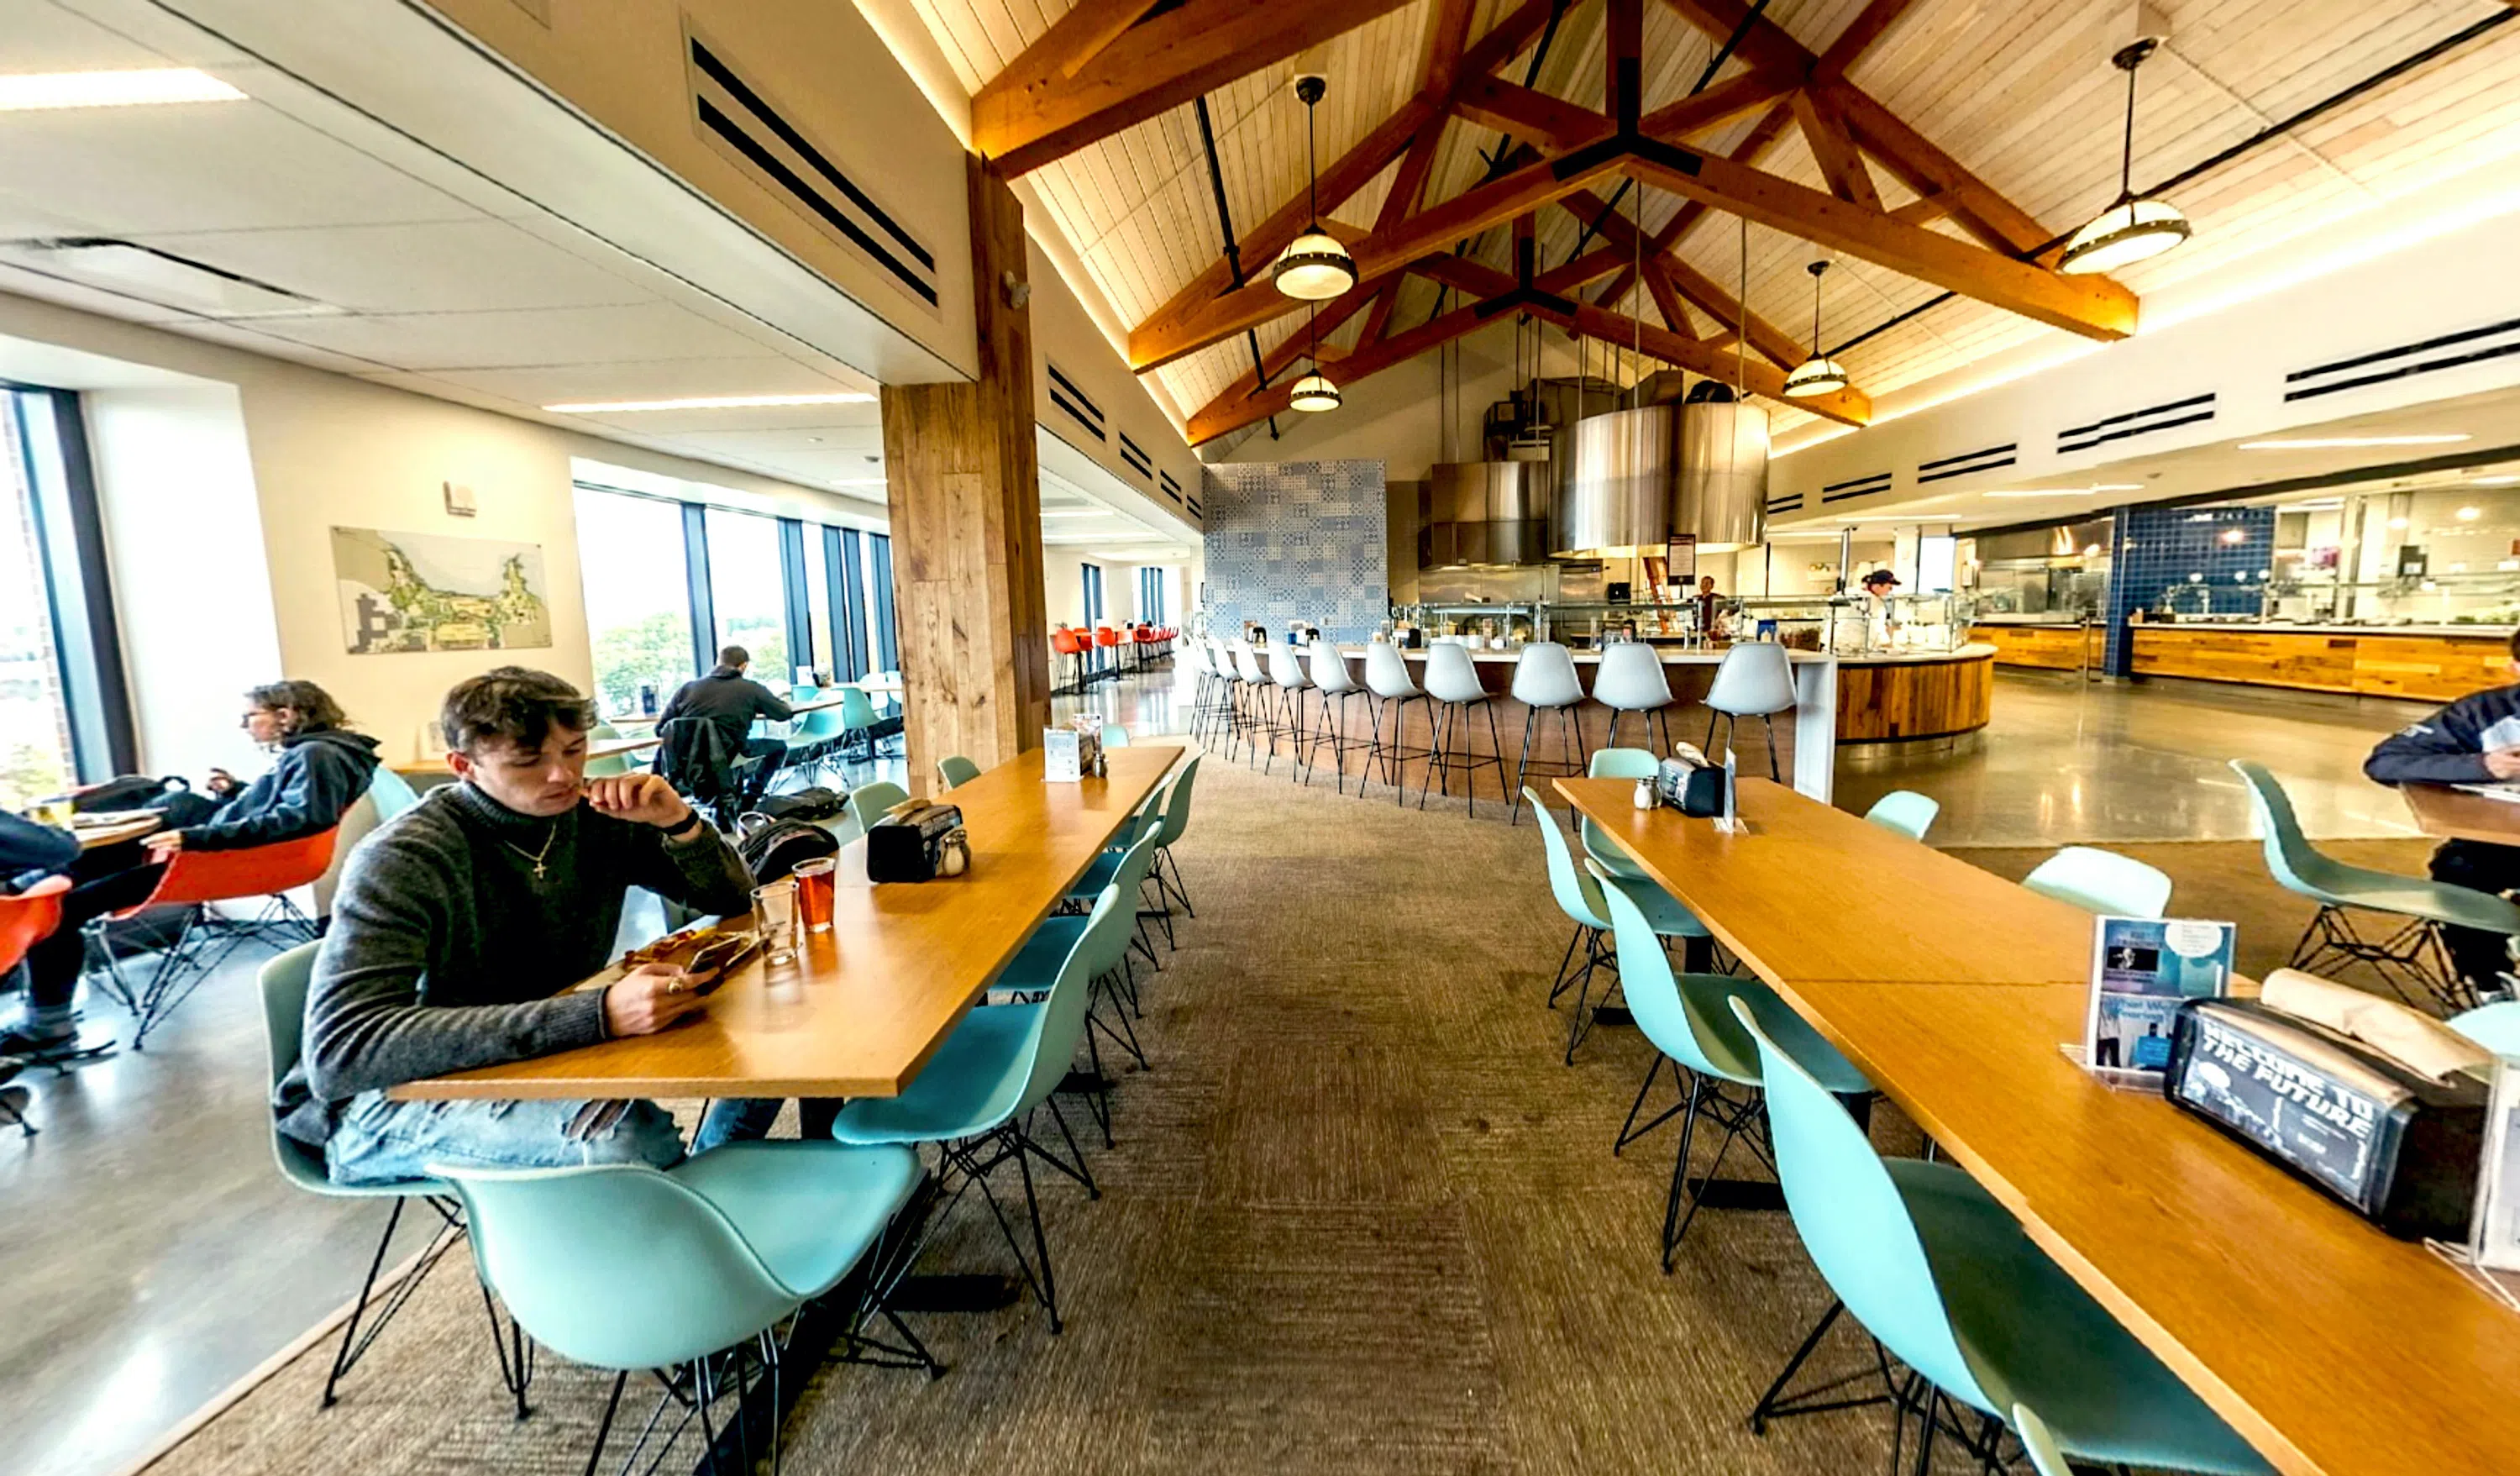 large spacious room with many tables and chairs. students eating